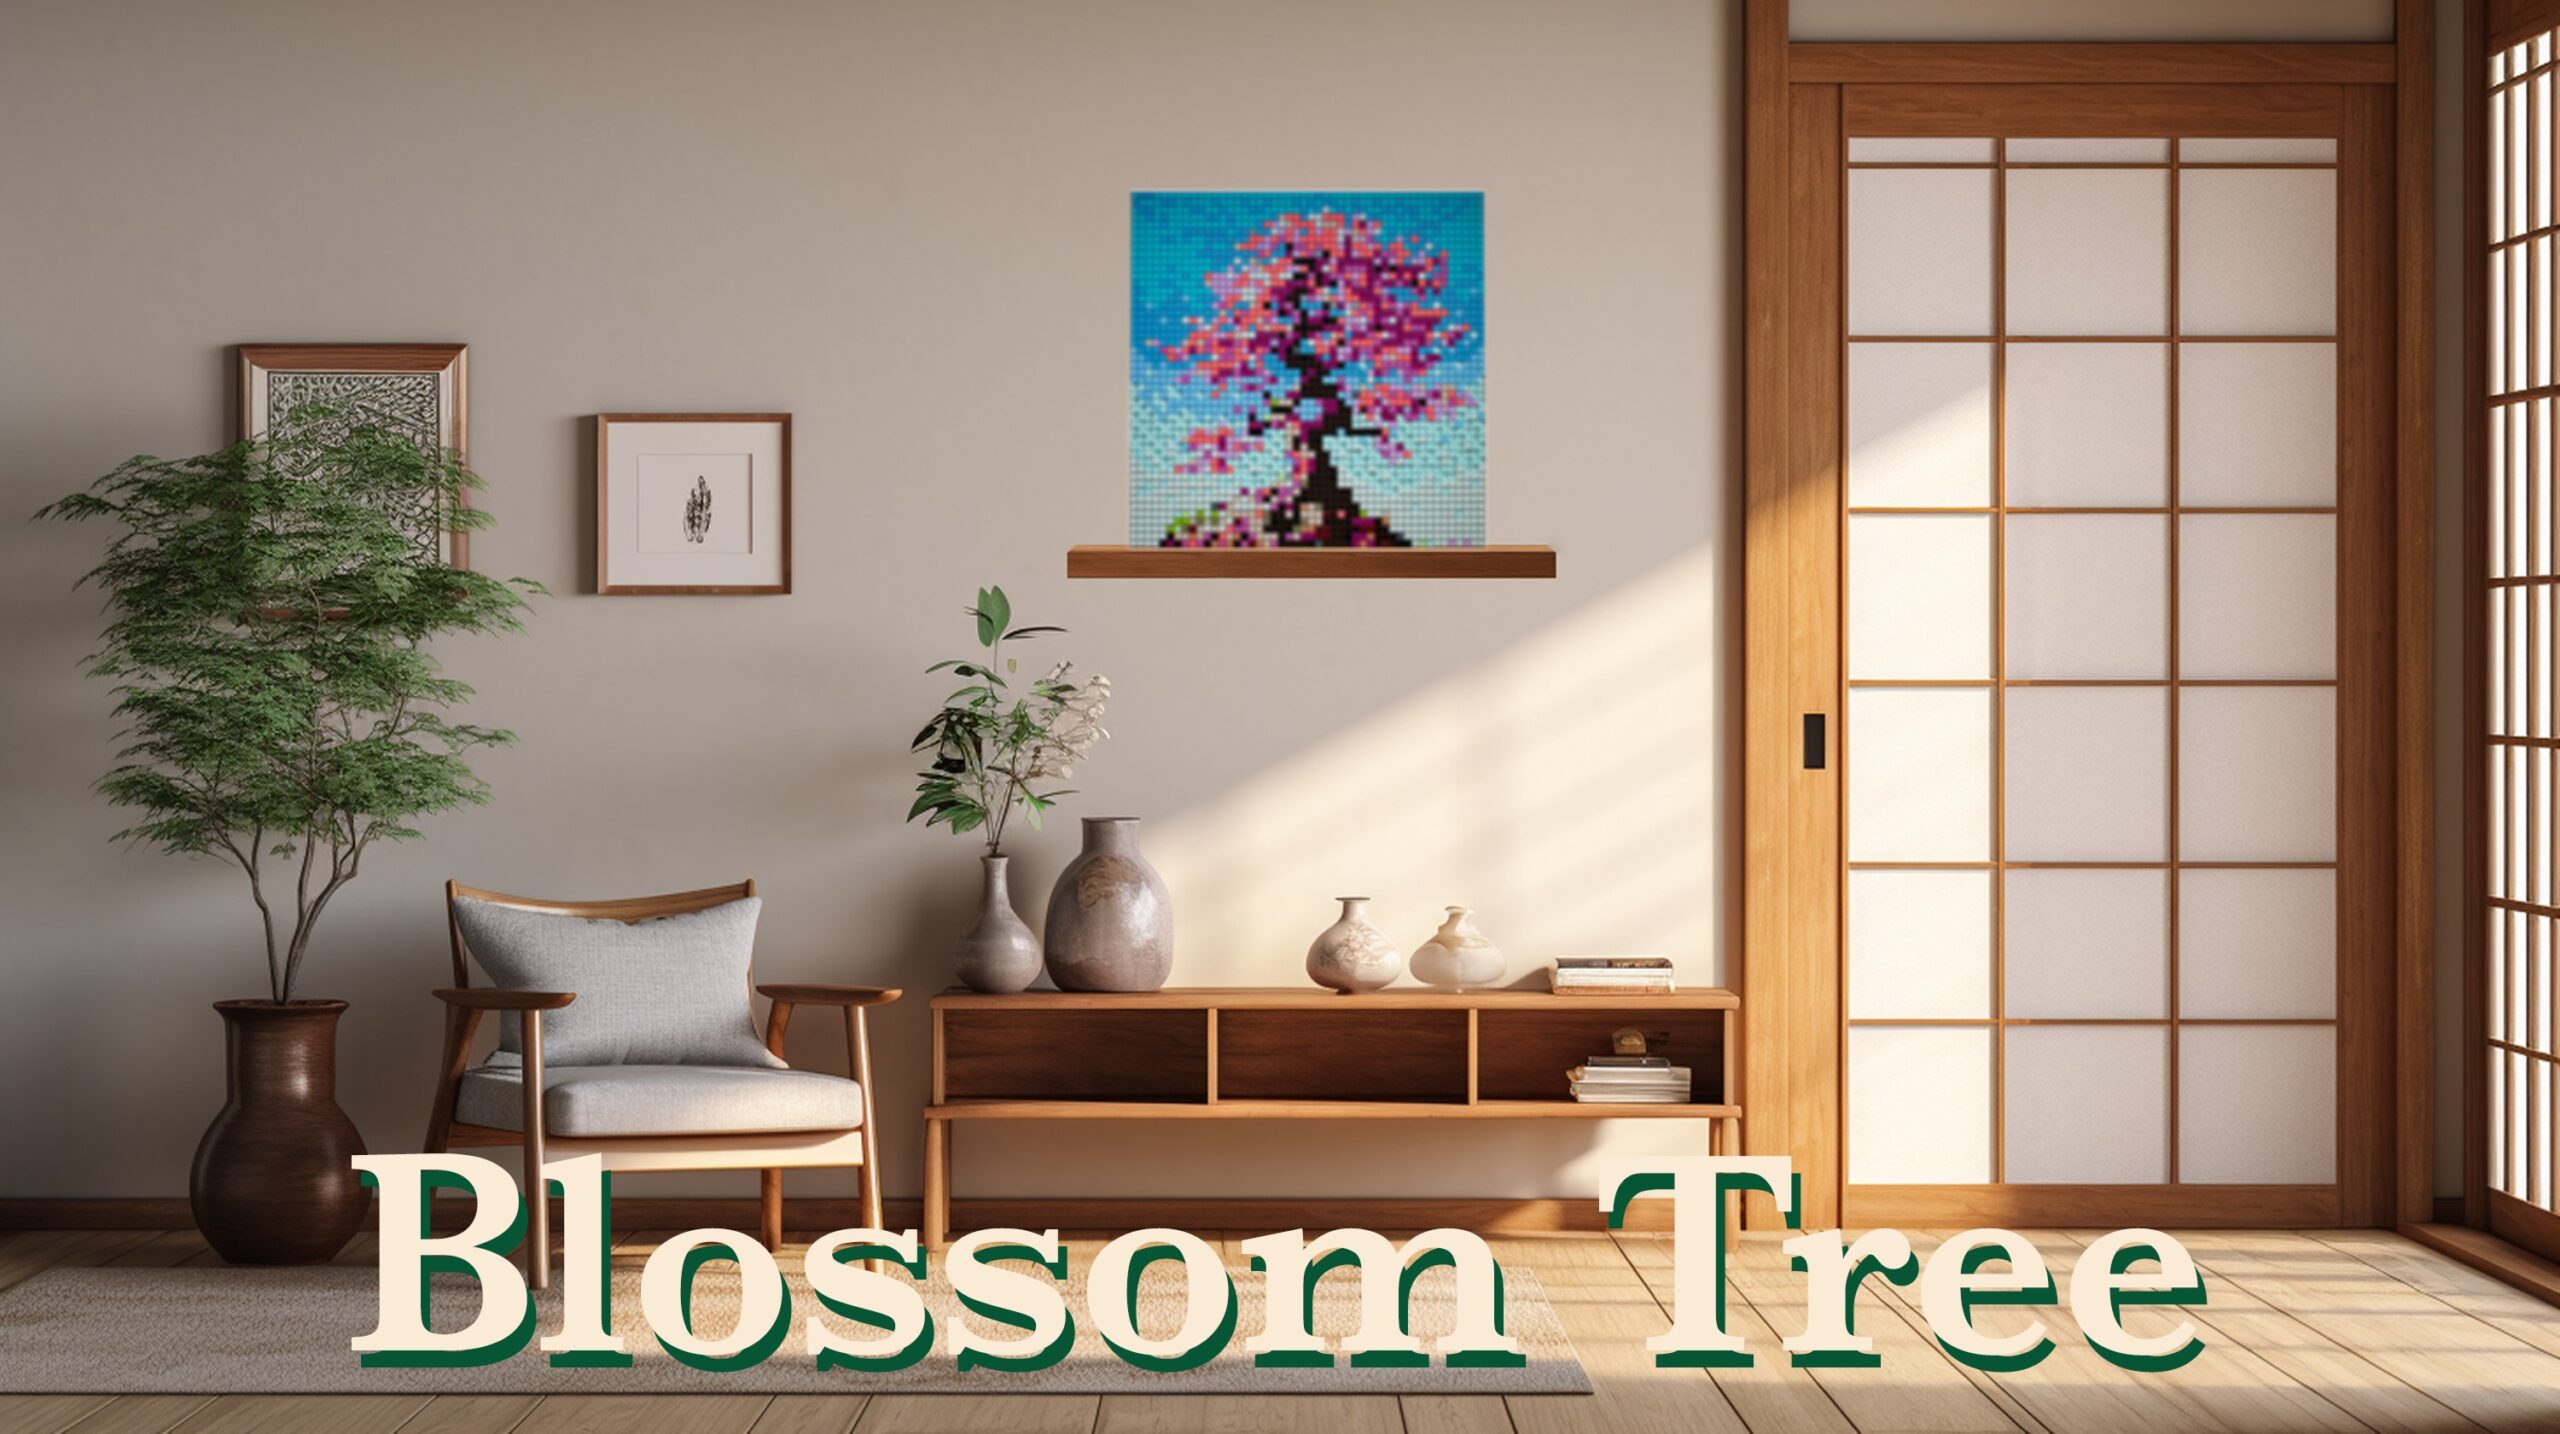 Blossom Tree Mosaic in Room (w Title)